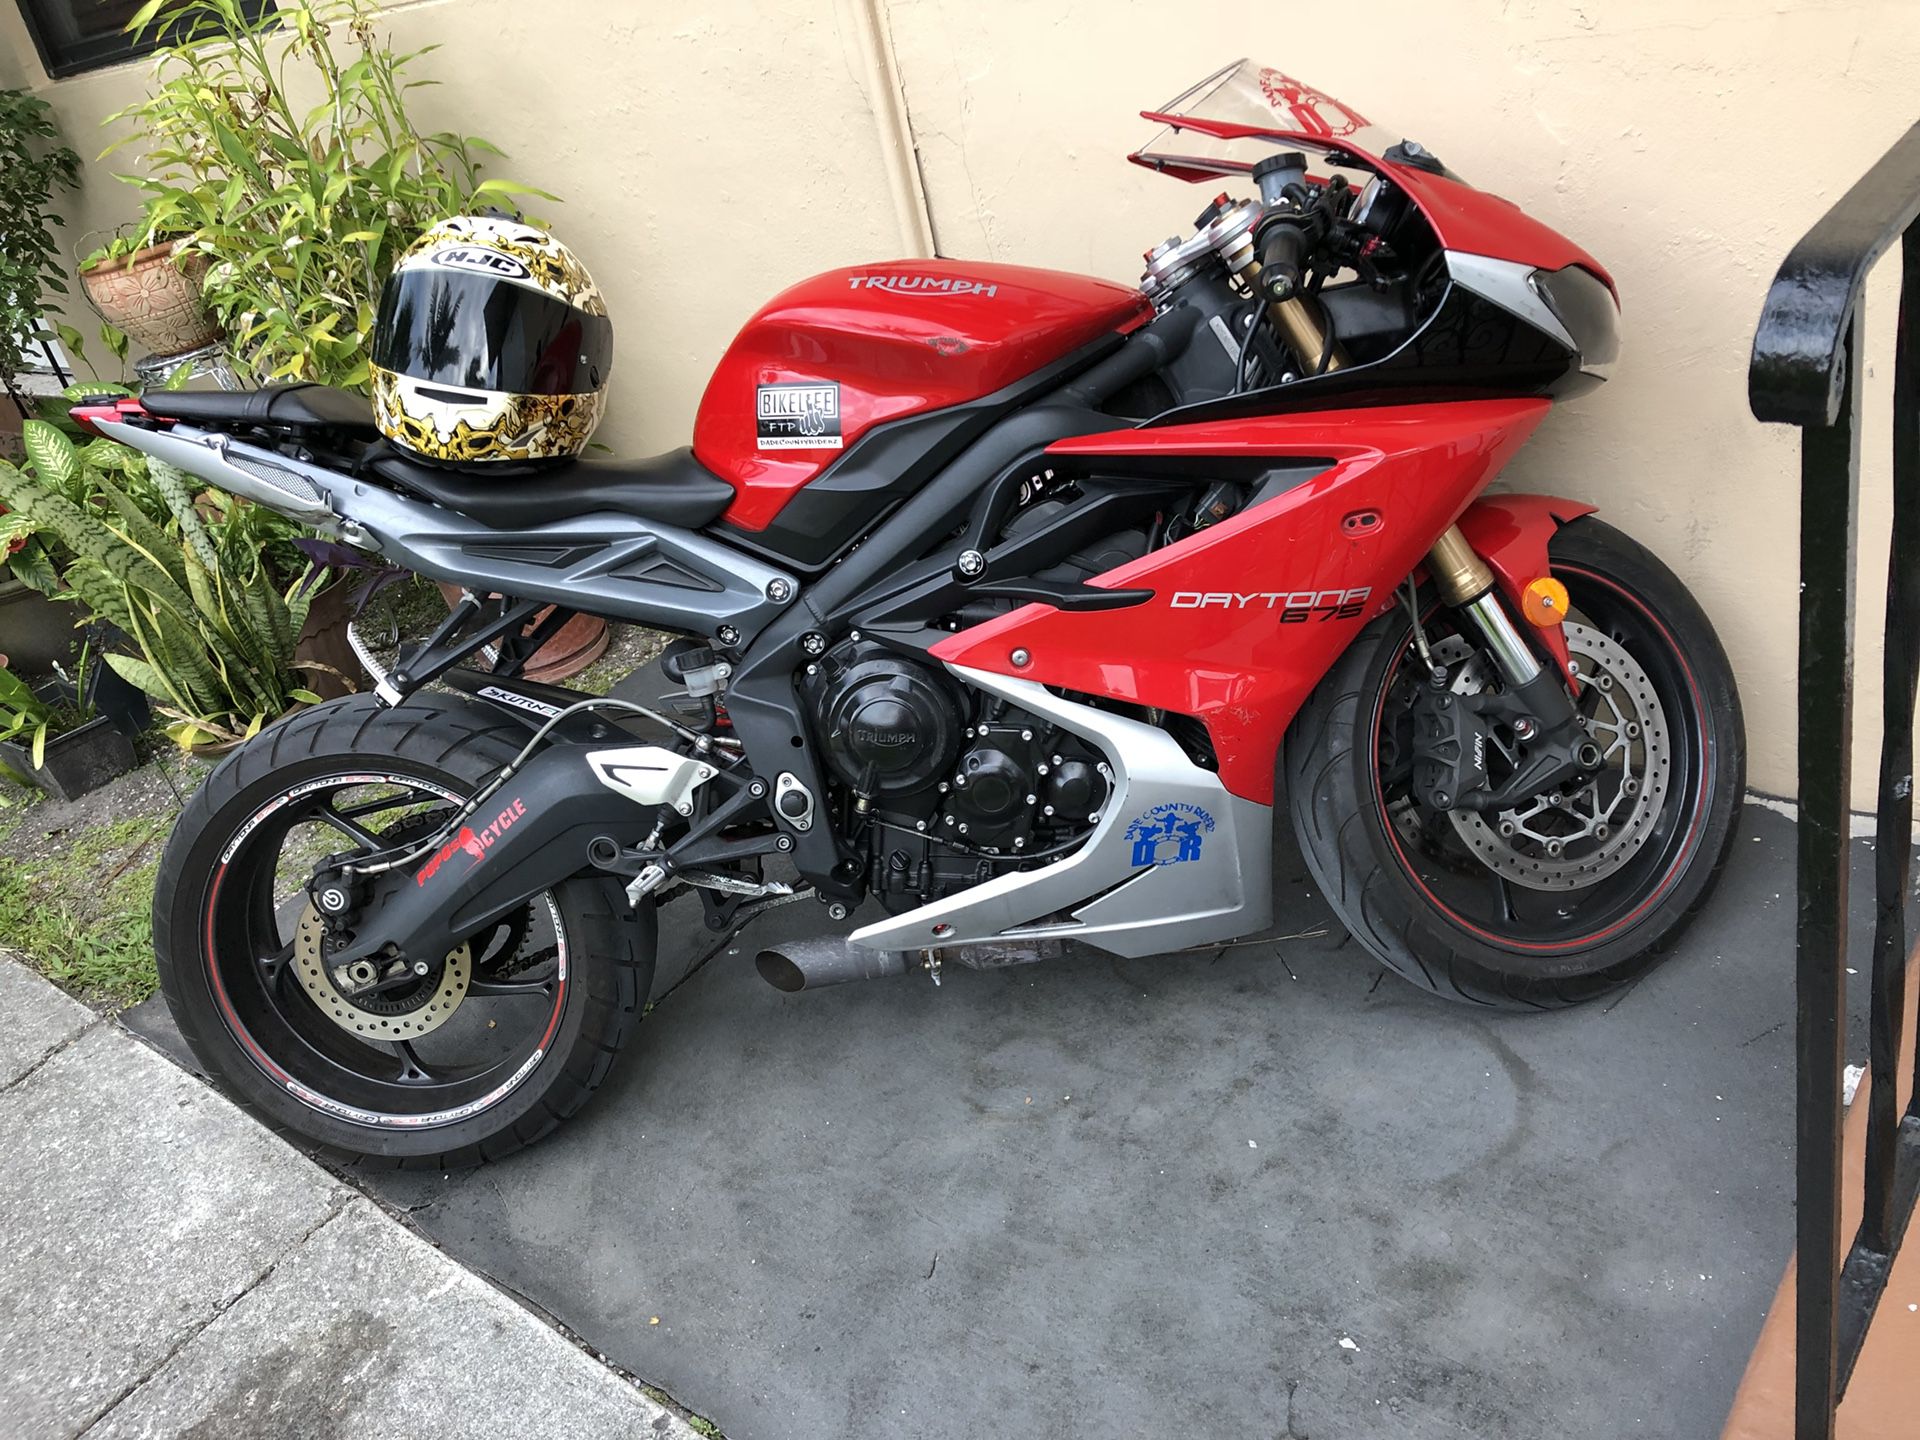 Triumph Daytona 675 2016 title rebuilt. Bike run grate just don’t want it anymore 4500 $ got some Scratches and cracks on the faring